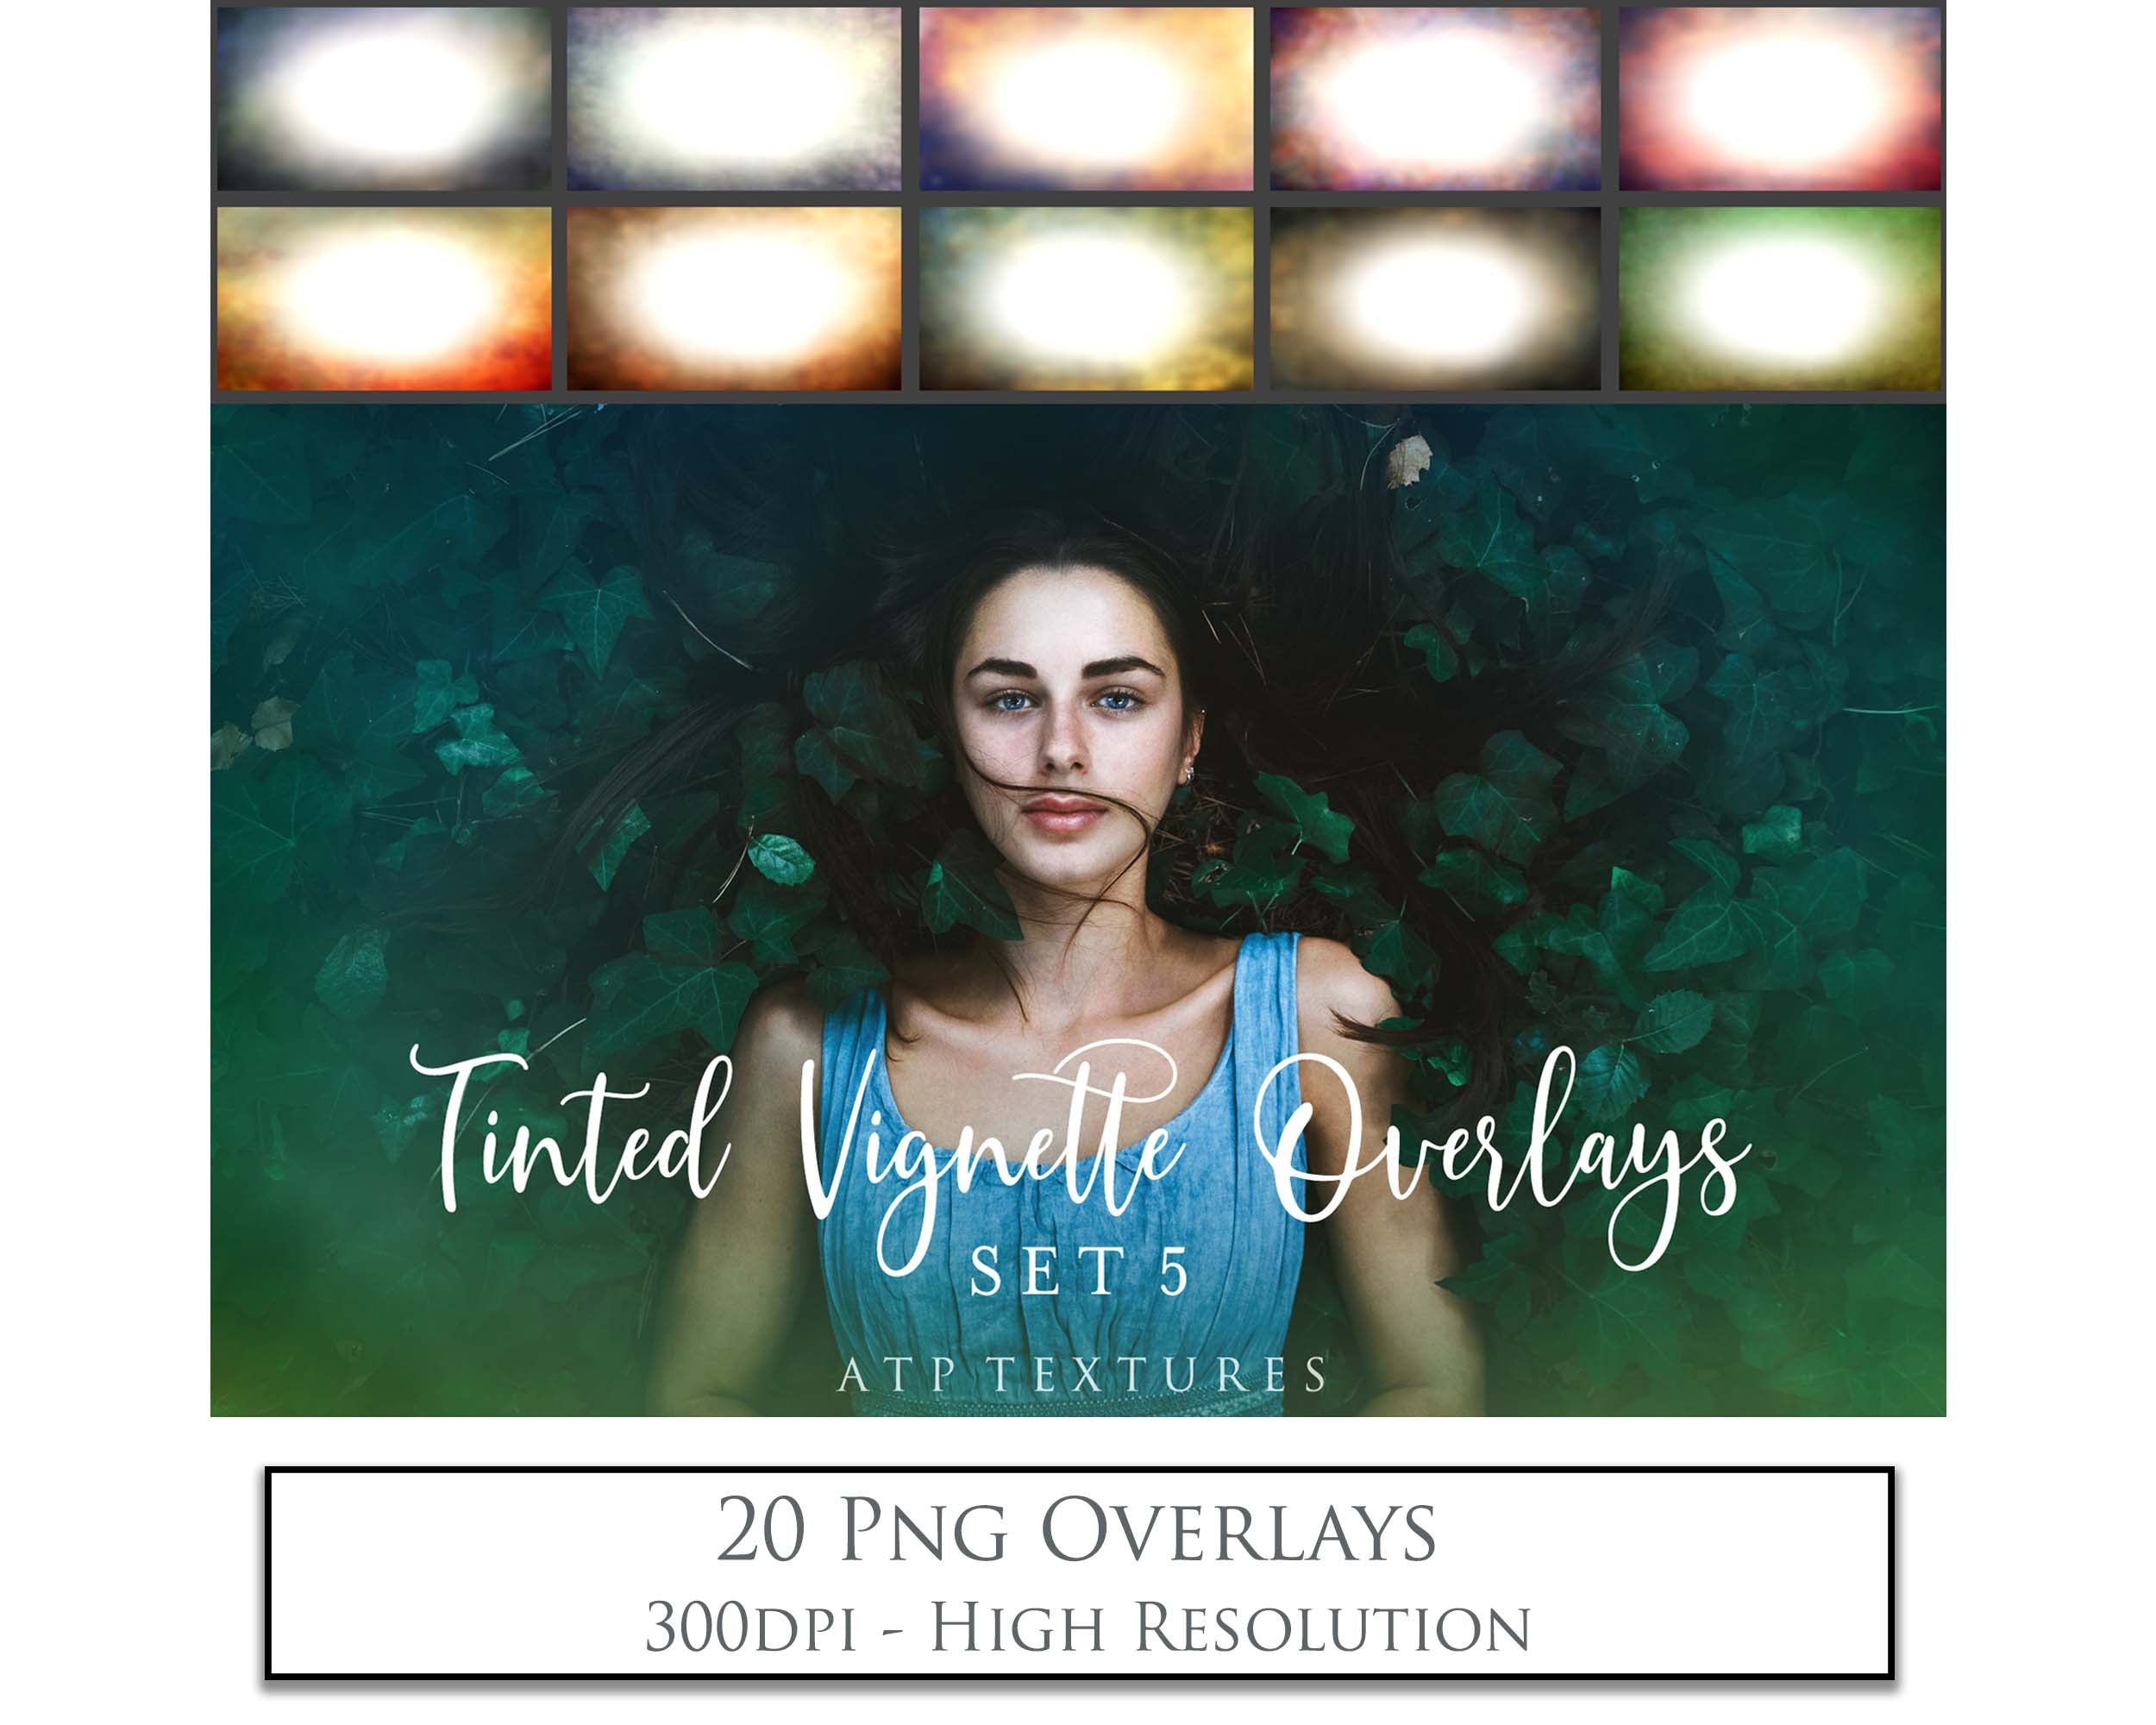 Png Overlays for photographer and digital artists. Jellyfish Overlays, Bubble Overlays, fine art photo overlays by ATP textures. High resolution, 300dpi.